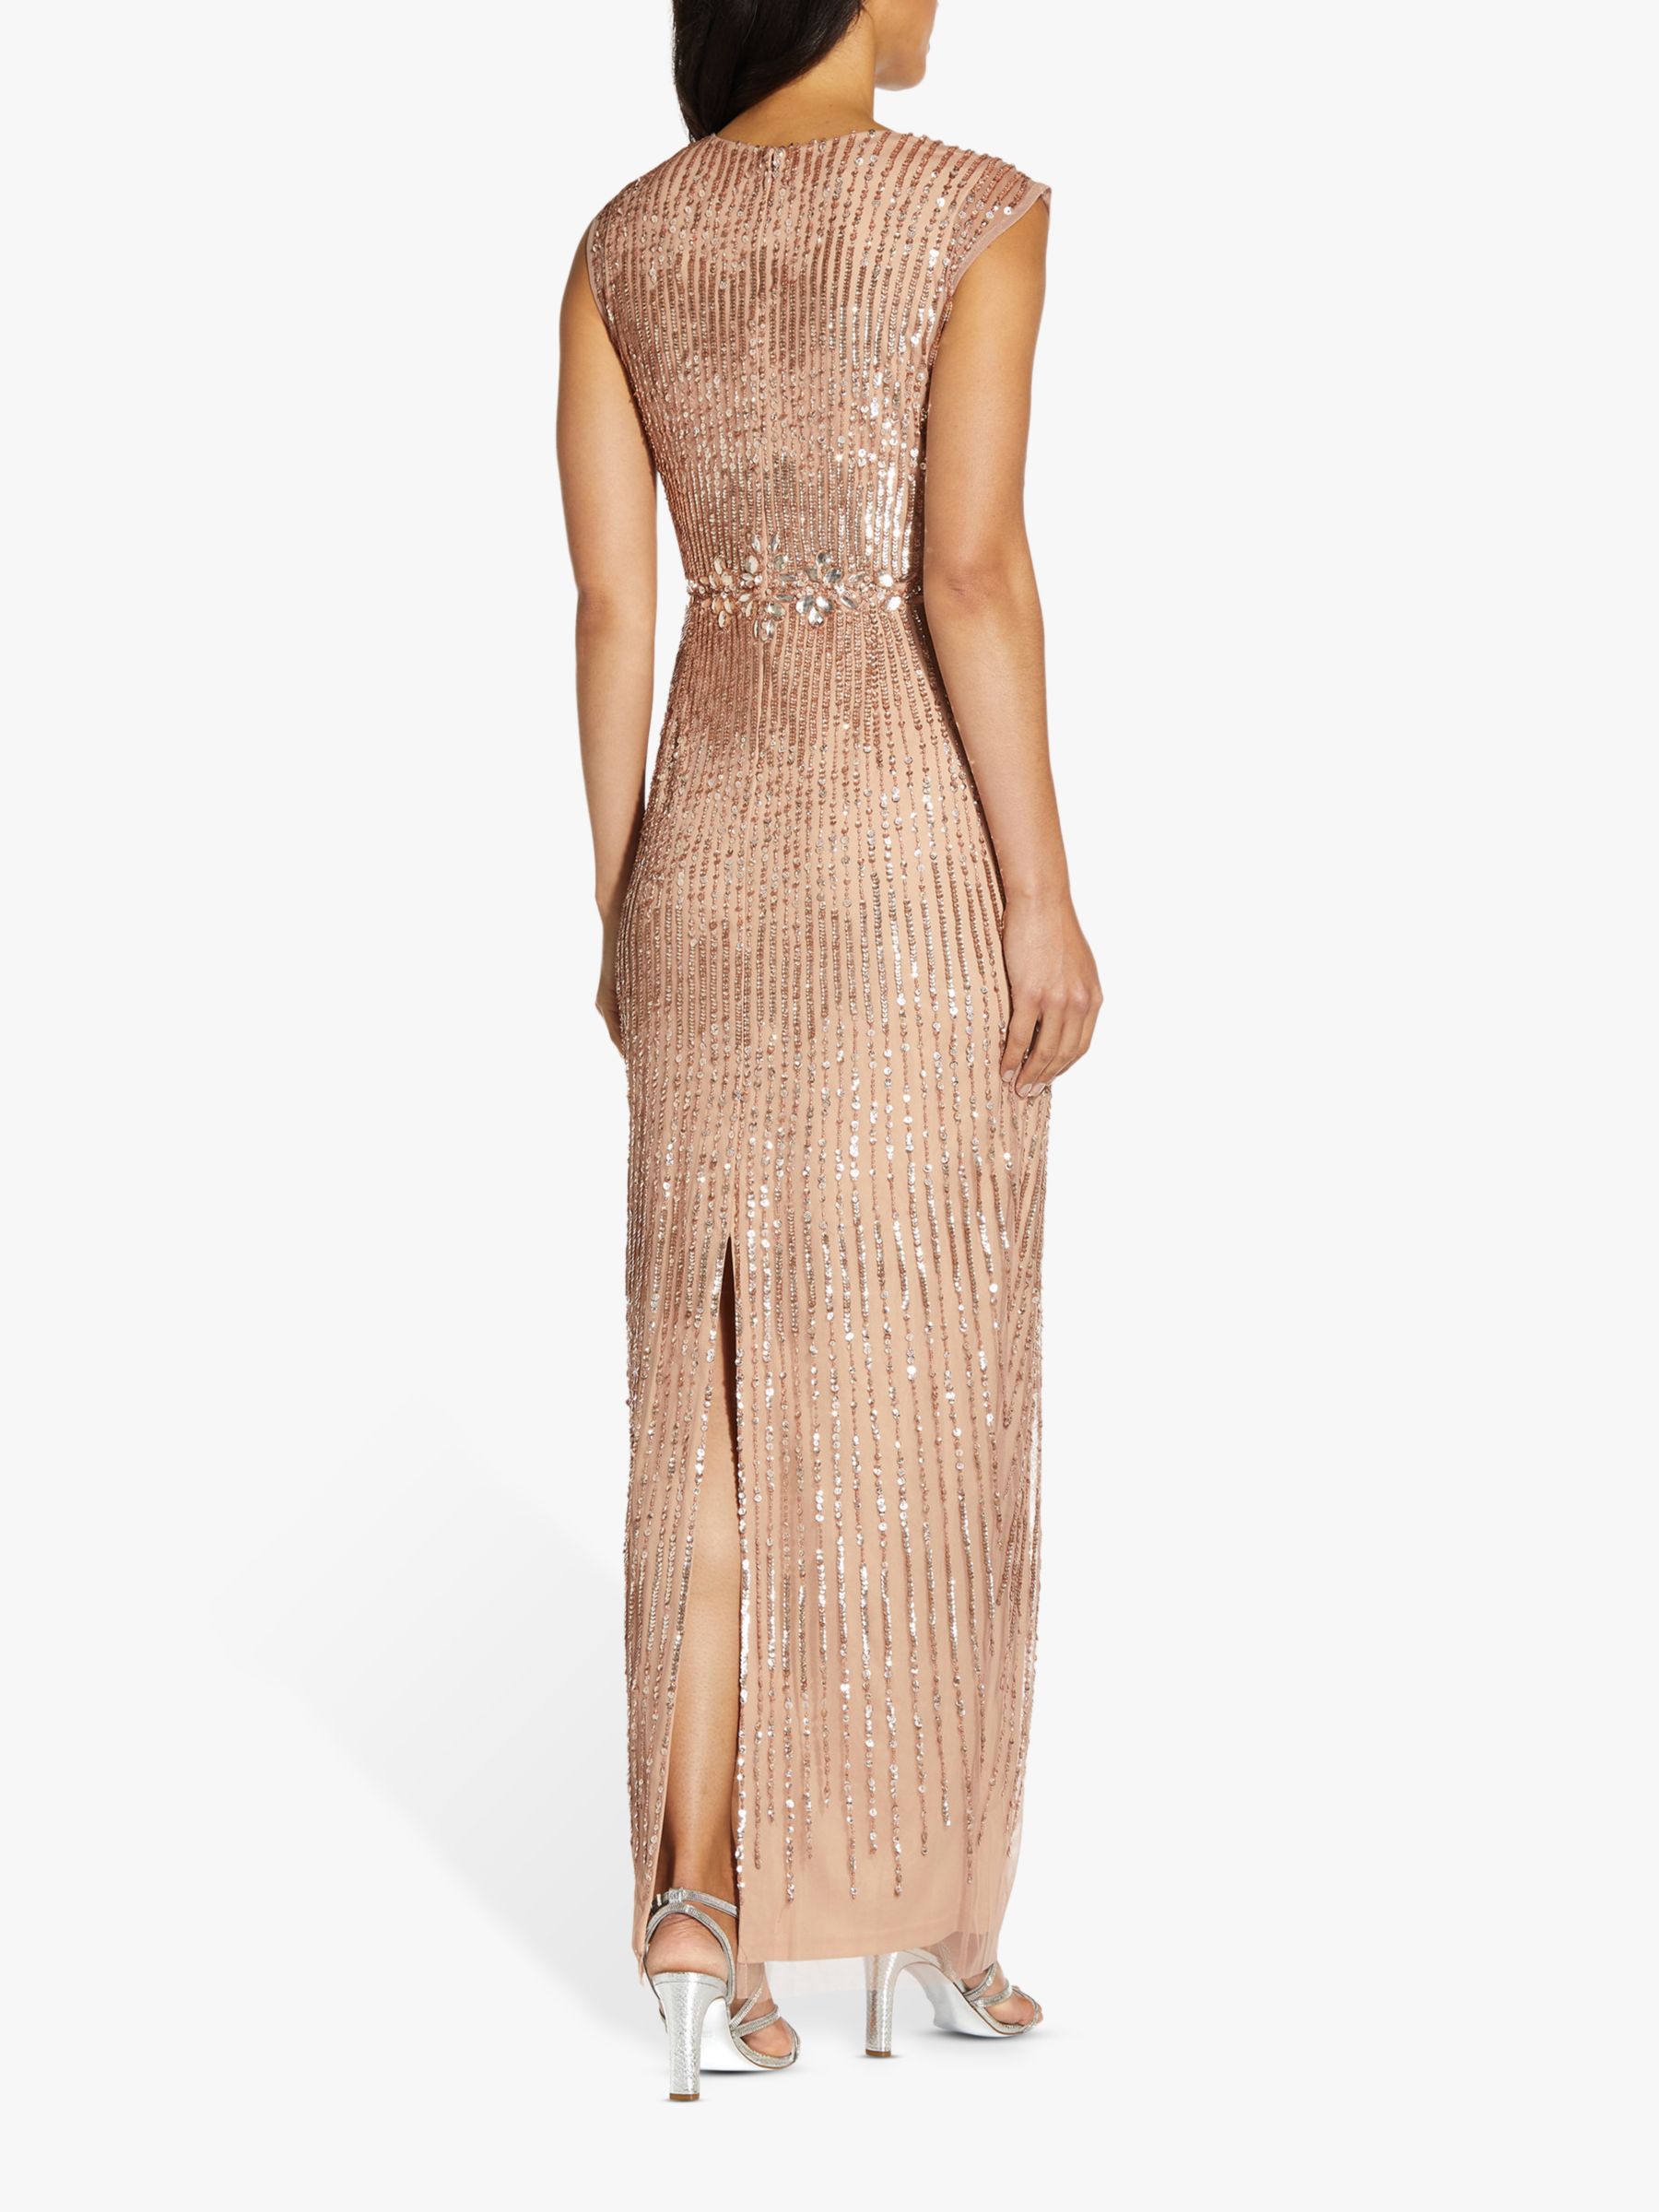 Adrianna Papell Beaded Cowl Neck Maxi Gown, Rose Gold at John Lewis ...